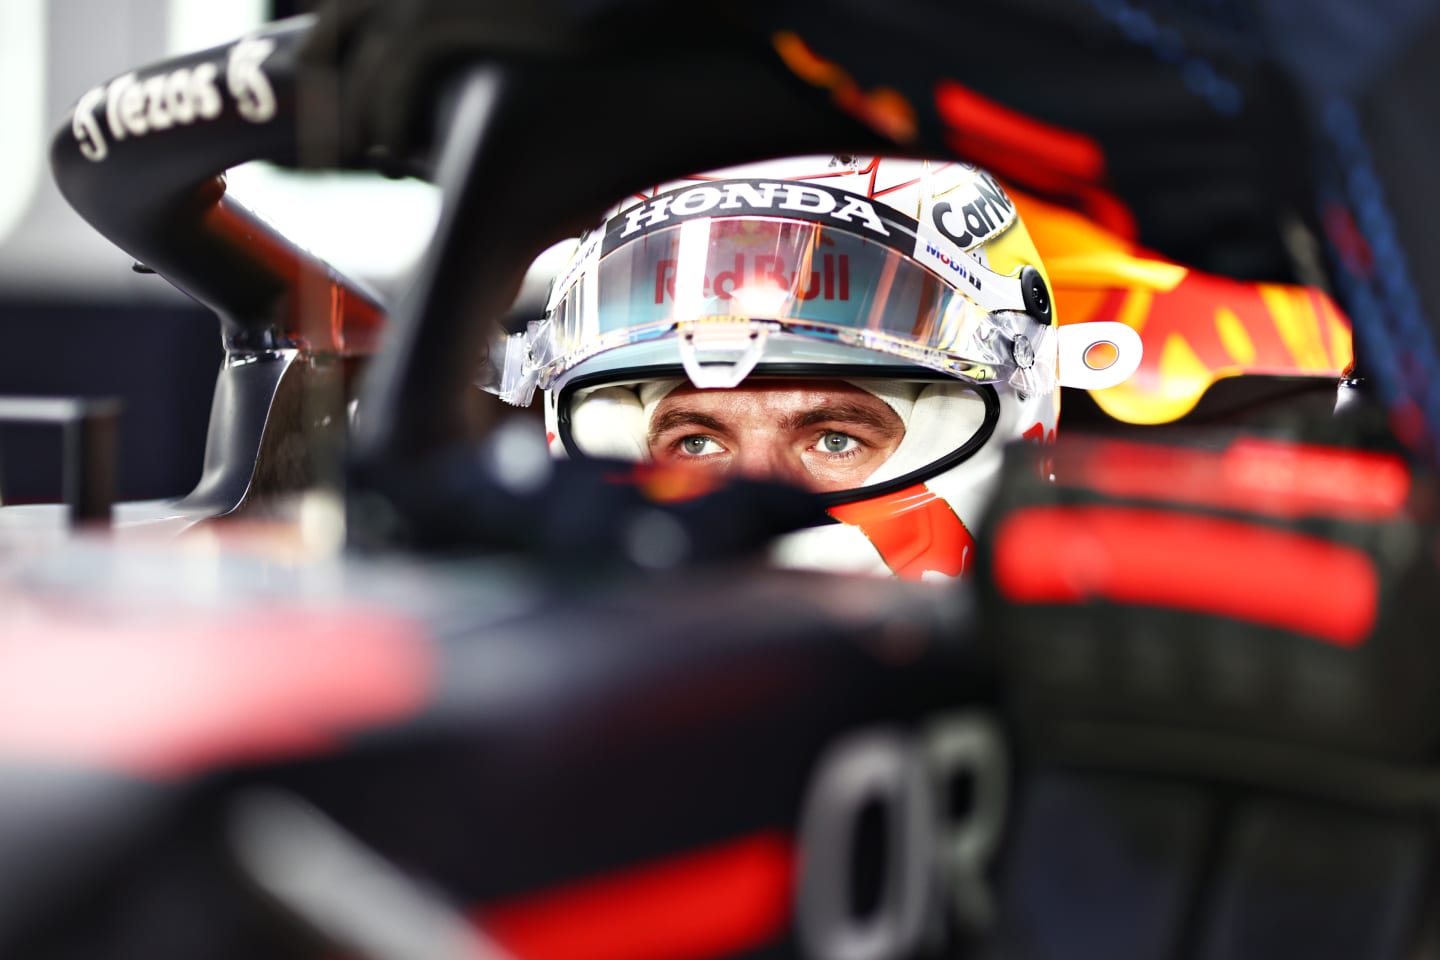 DOHA, QATAR - NOVEMBER 21: Max Verstappen of Netherlands and Red Bull Racing prepares to drive in